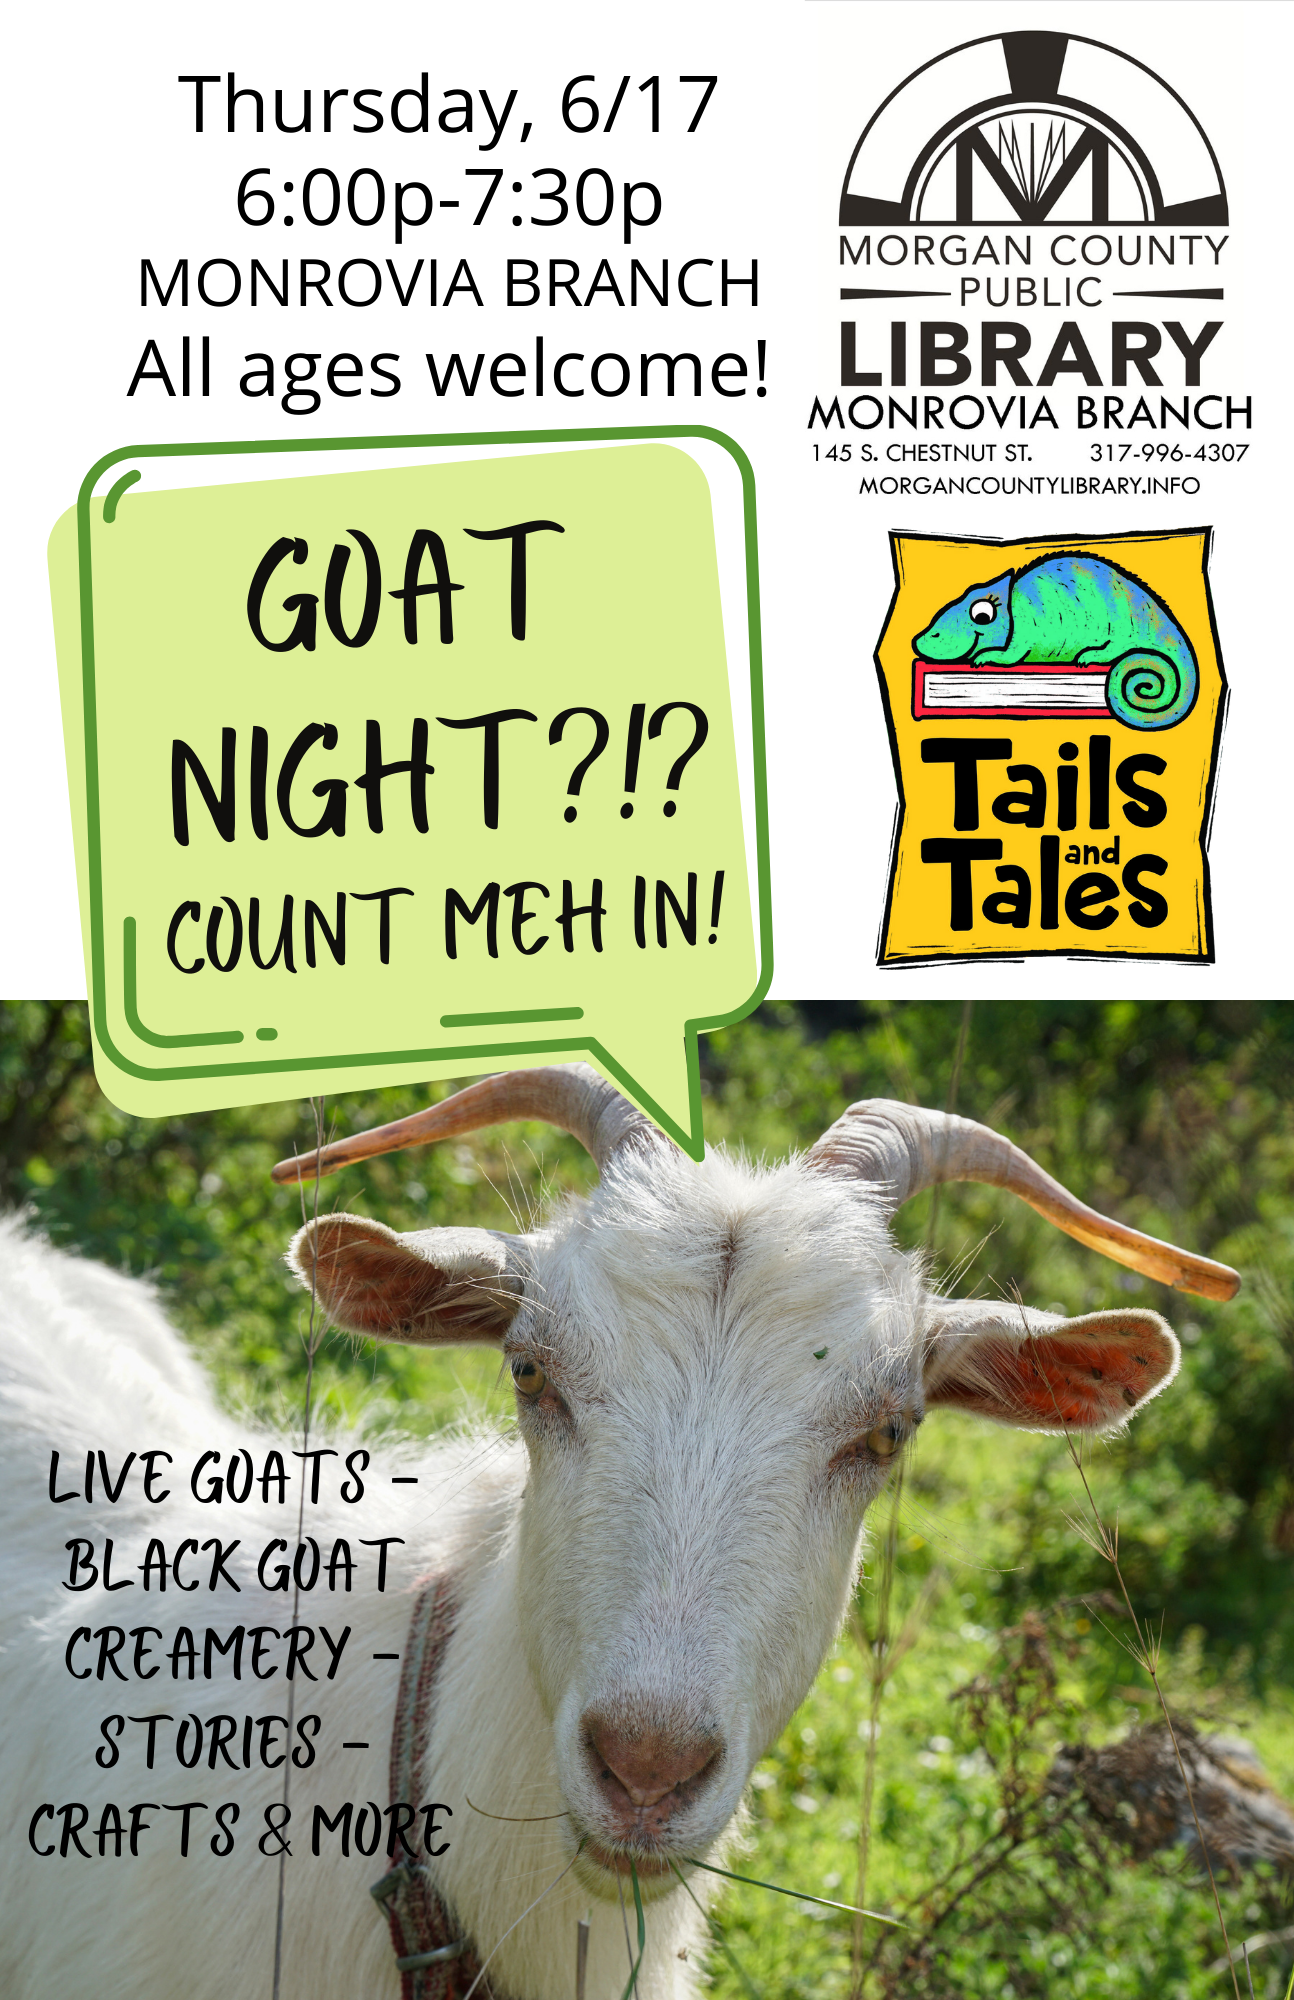 picture of a goat, library logo, goat night information